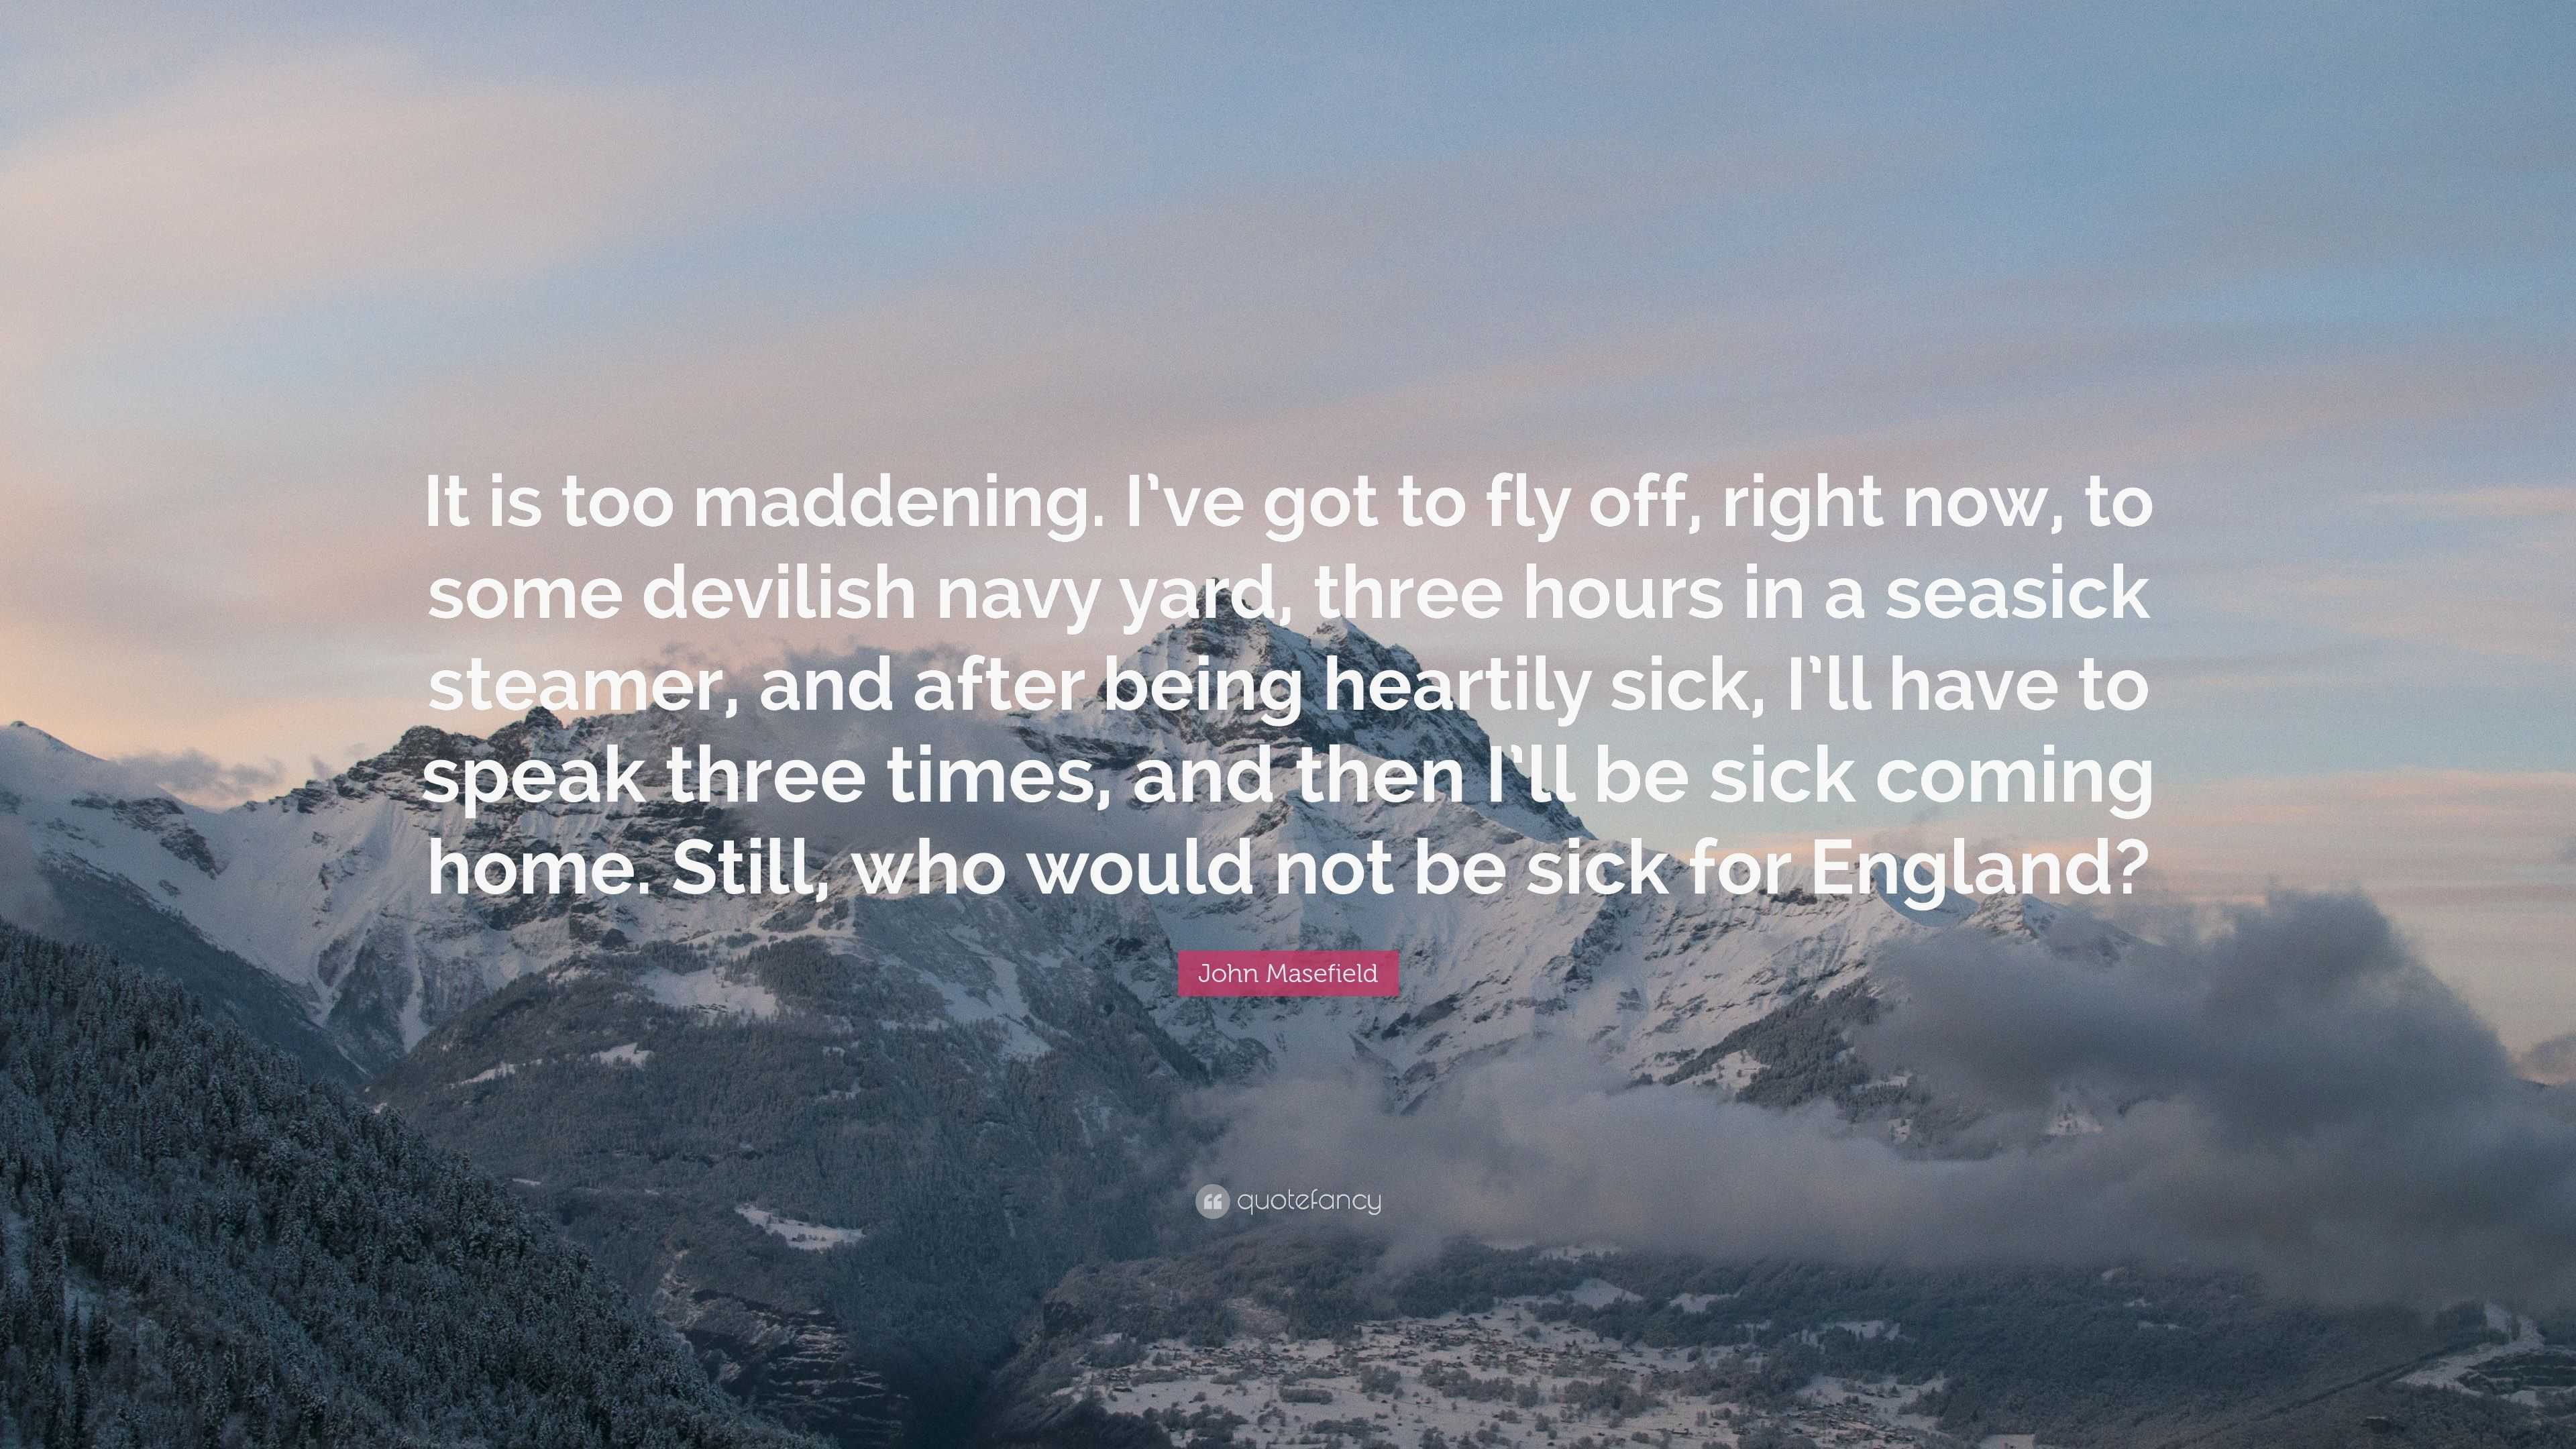 John Masefield Quote: “It is too maddening. I've got to fly off